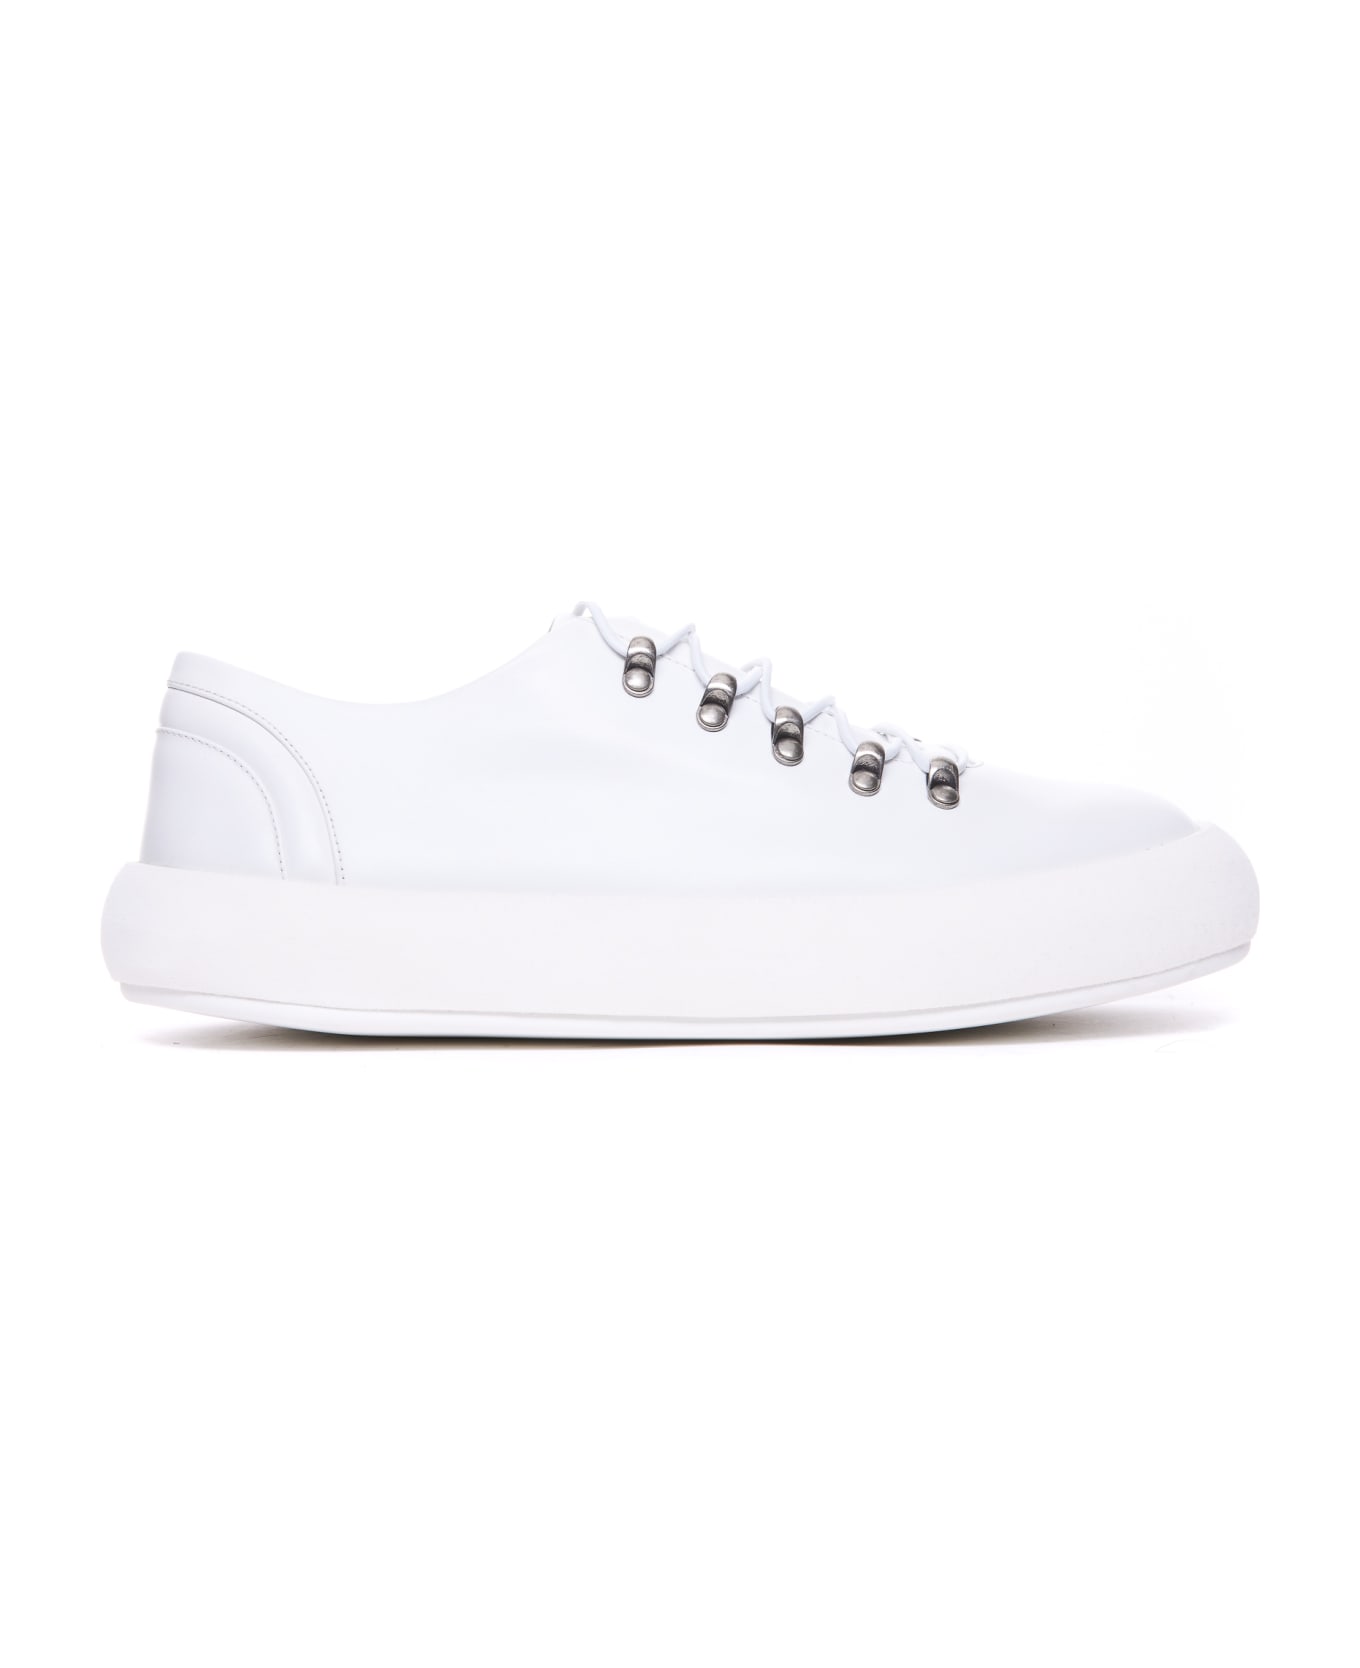 Marsell Espana Lace Up Shoes - White スニーカー